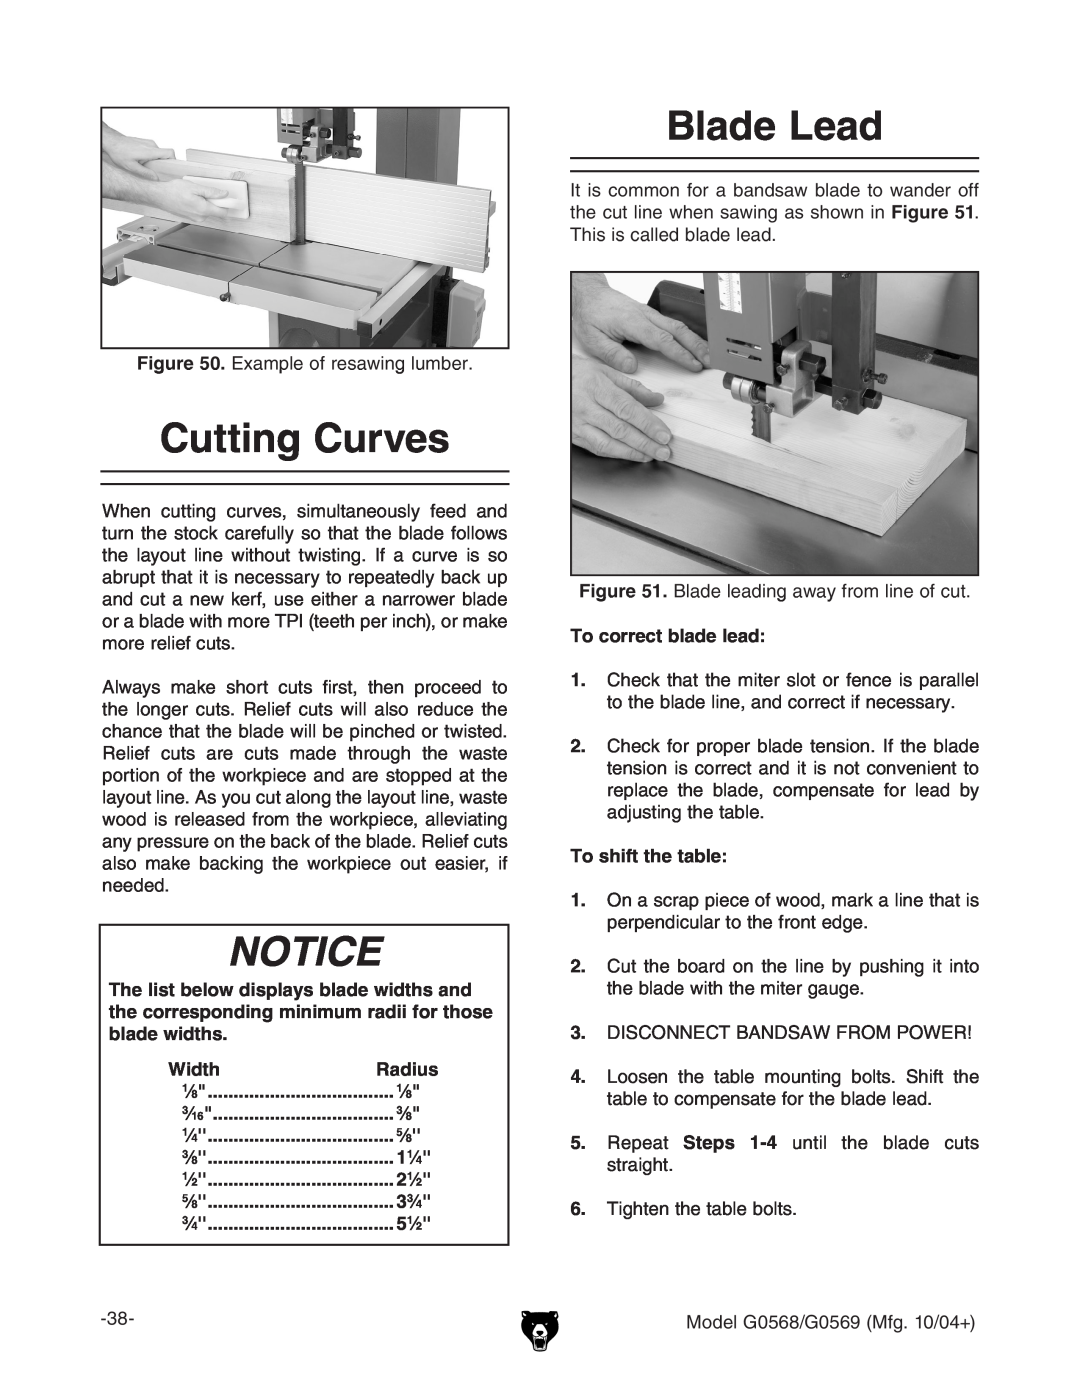 Grizzly G0569, G0568 Cutting Curves, Blade Lead, Width, 1 1⁄, 2 1⁄, 3 3⁄, 5 1⁄, To correct blade lead, To shift the table 